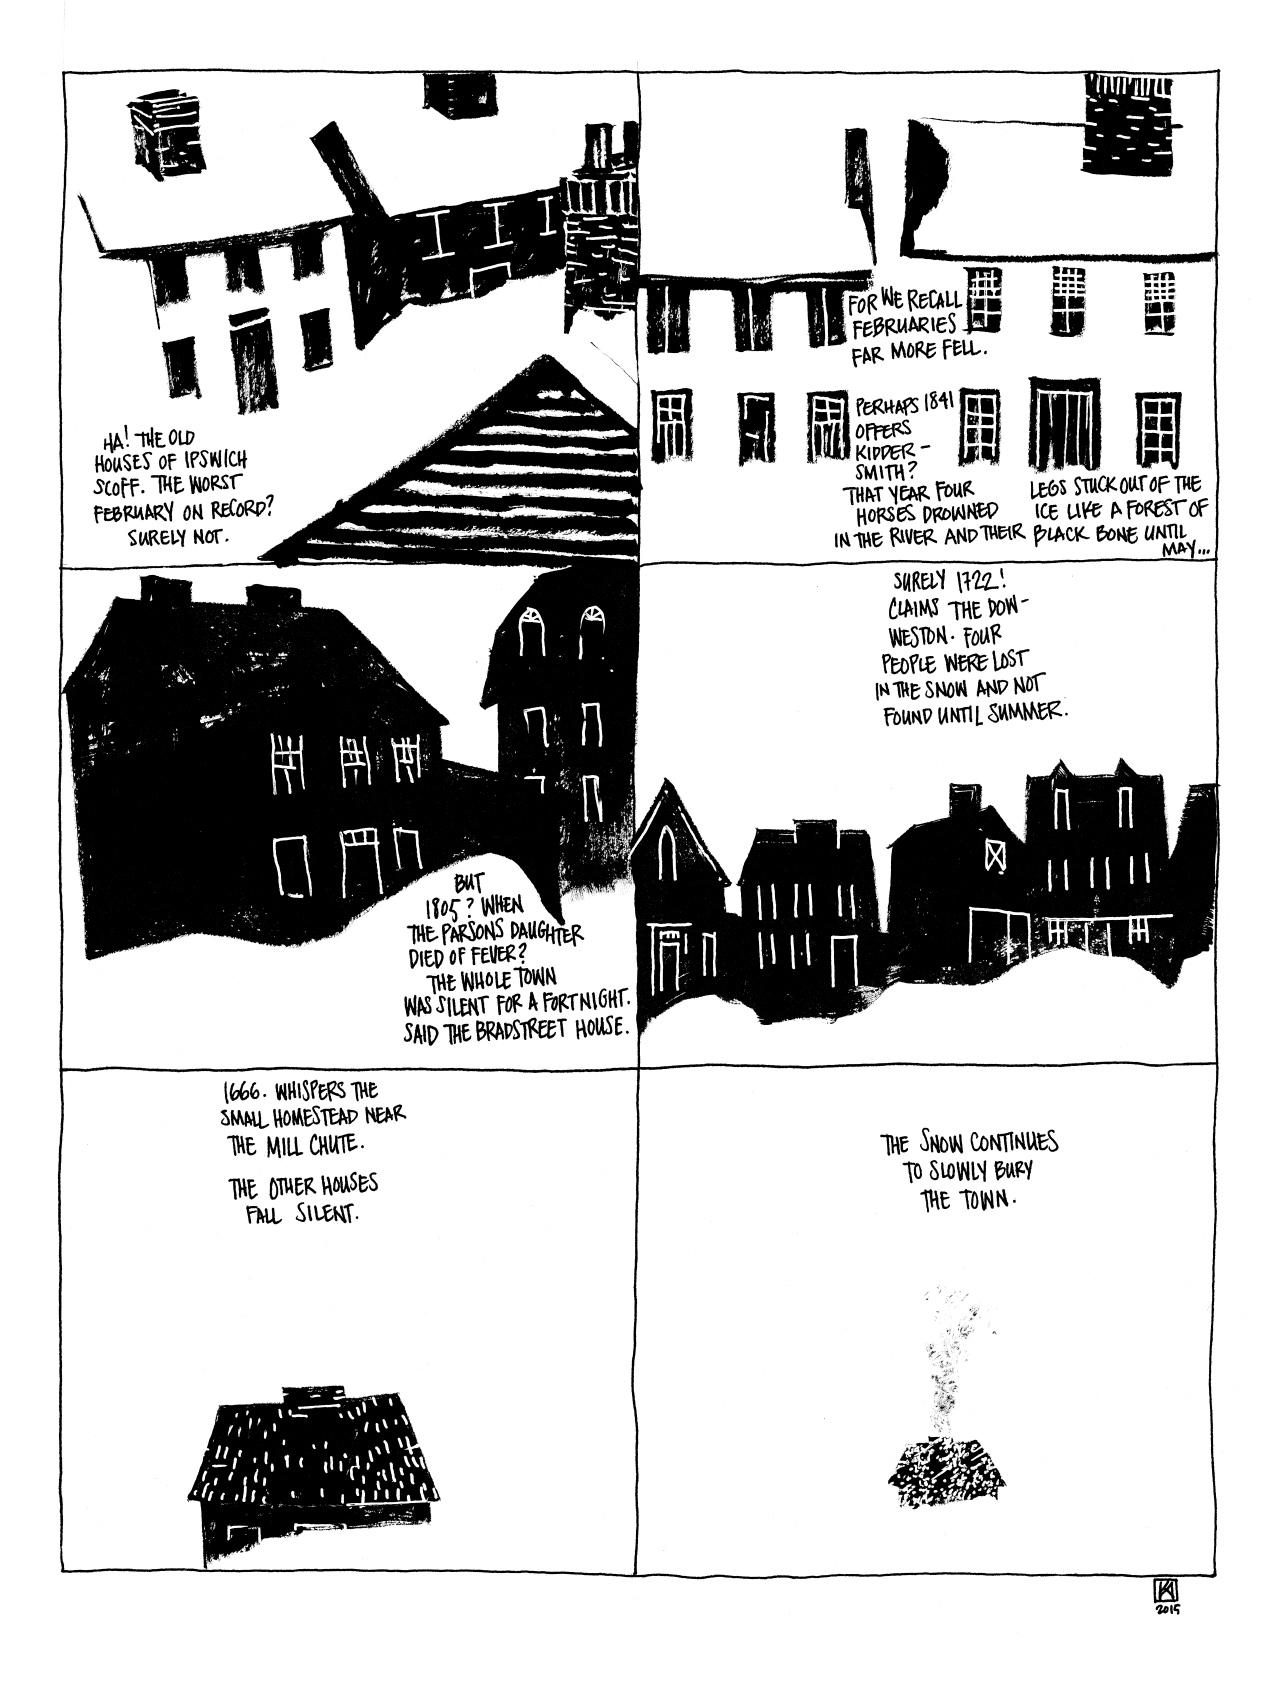 In Pieces: Someplace Which I Call Home (1/4) - Page 1